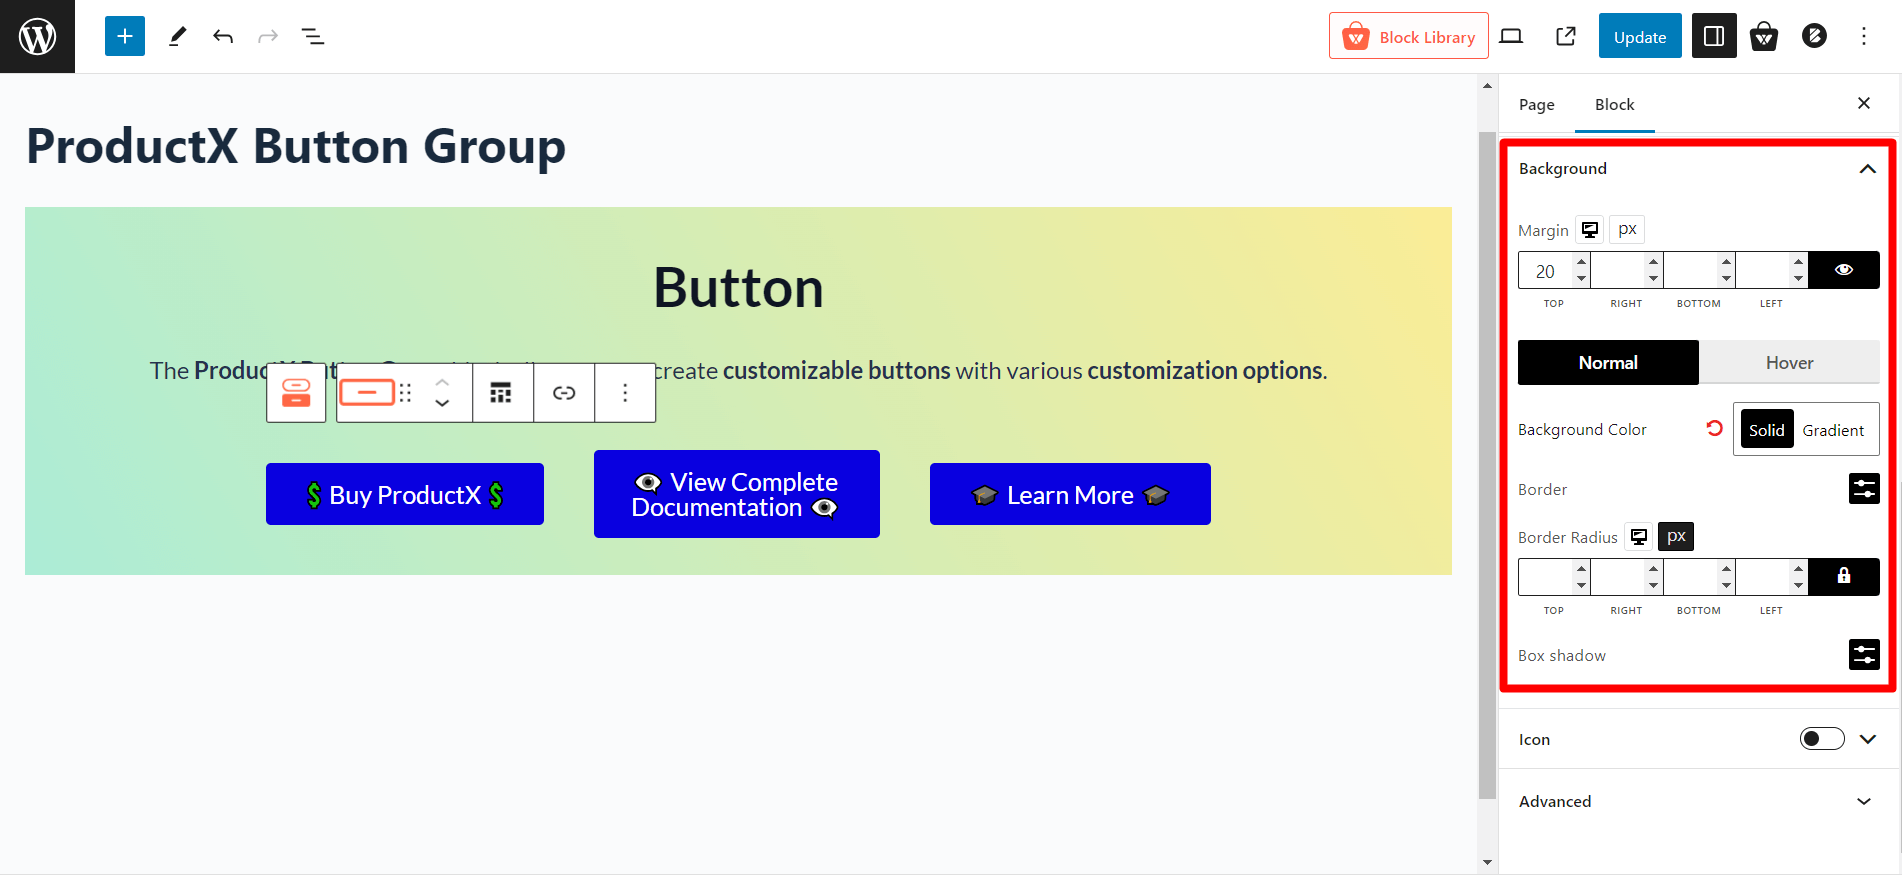 Button Background Settings